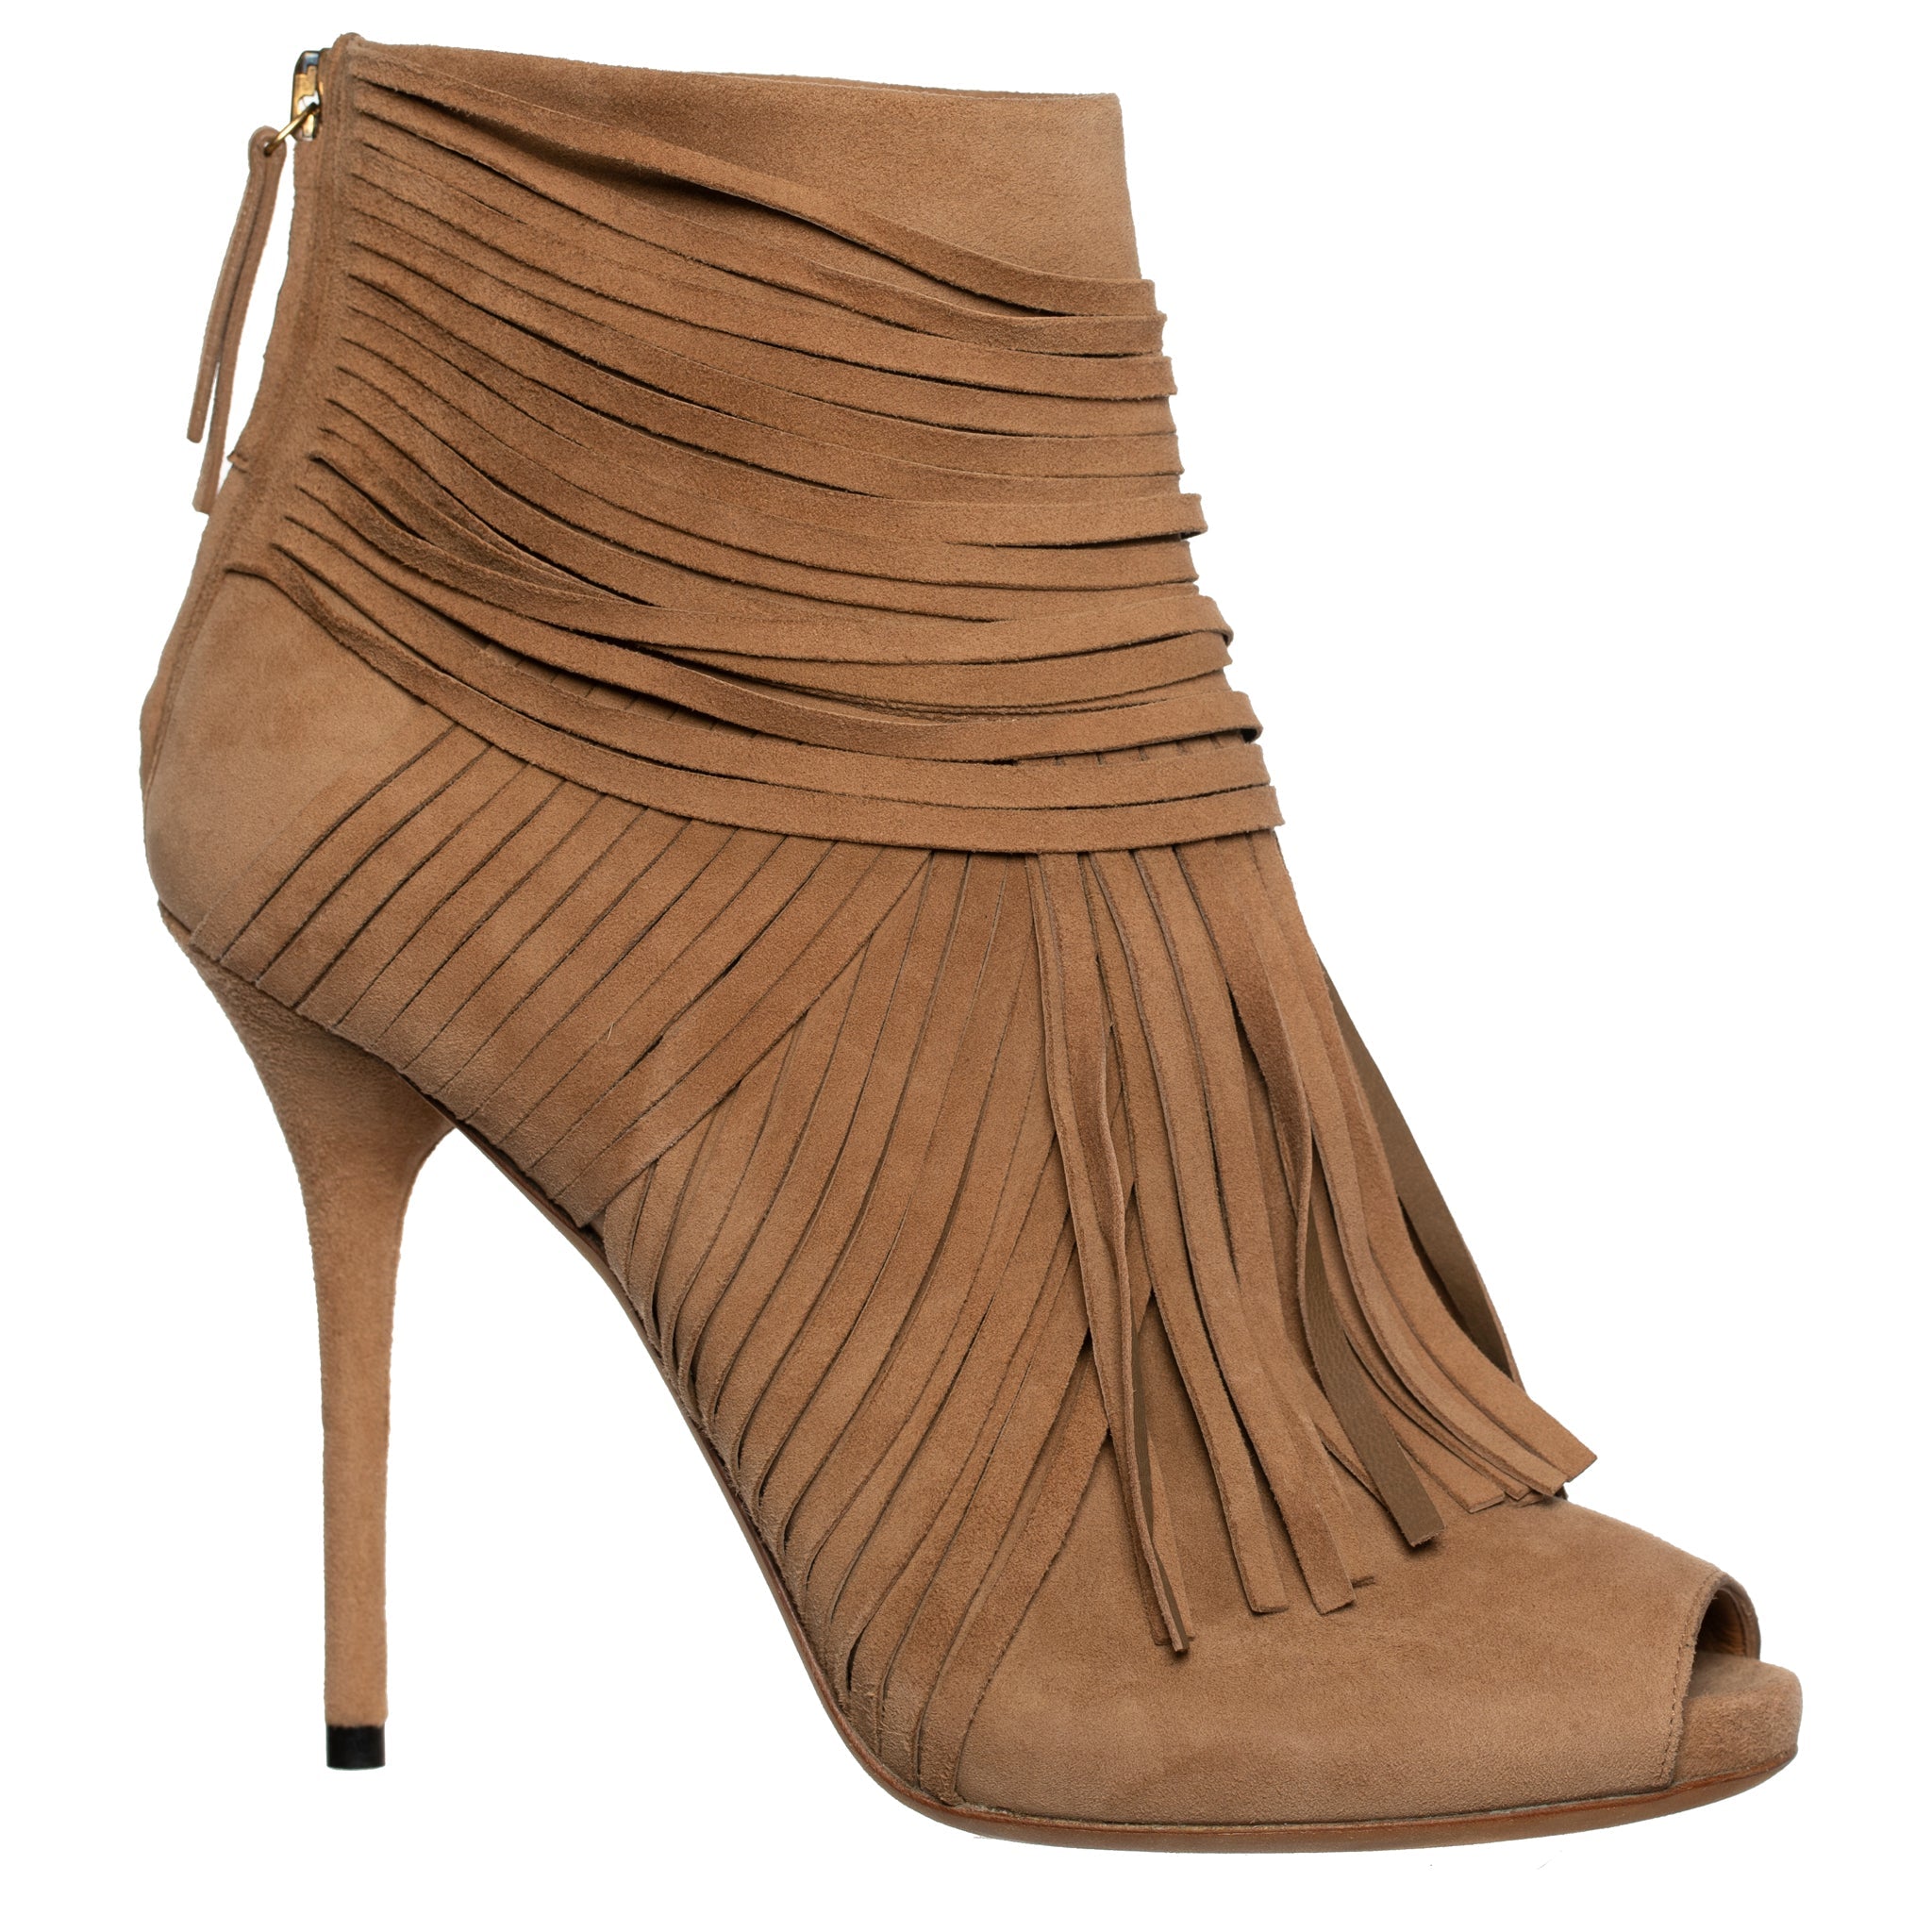 GUCCI ACKERMAN SUEDE FRINGE TAN BOOTIES 38 IT - On Repeat